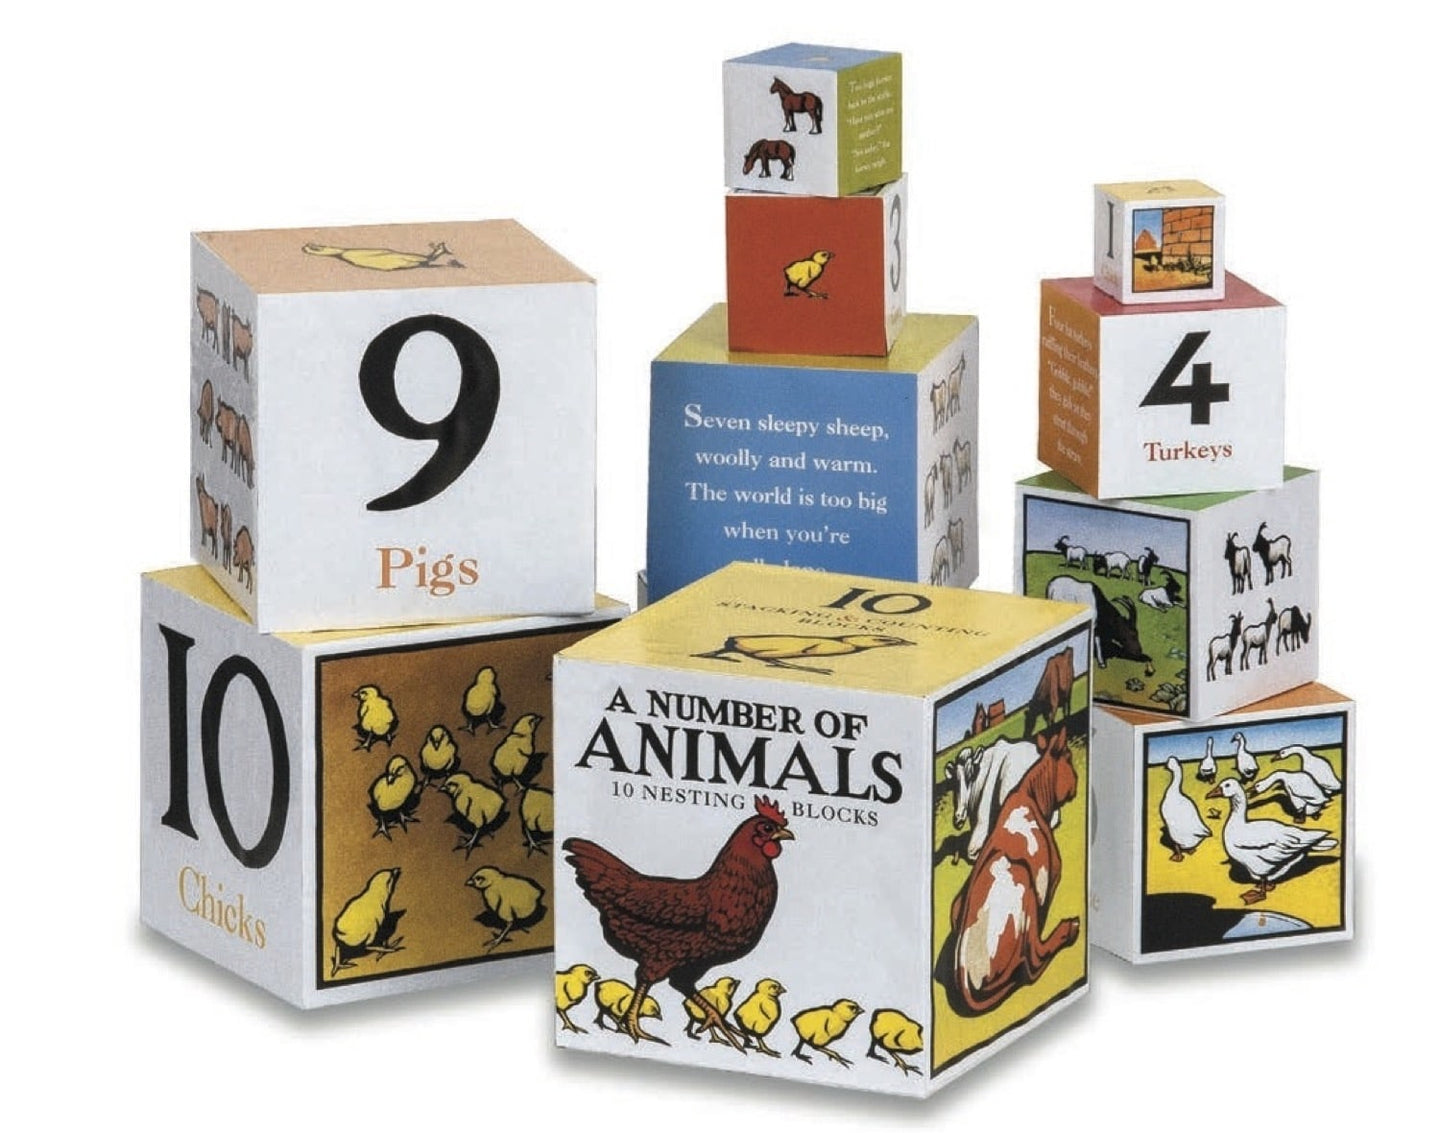 A Number of Animals Nesting Blocks